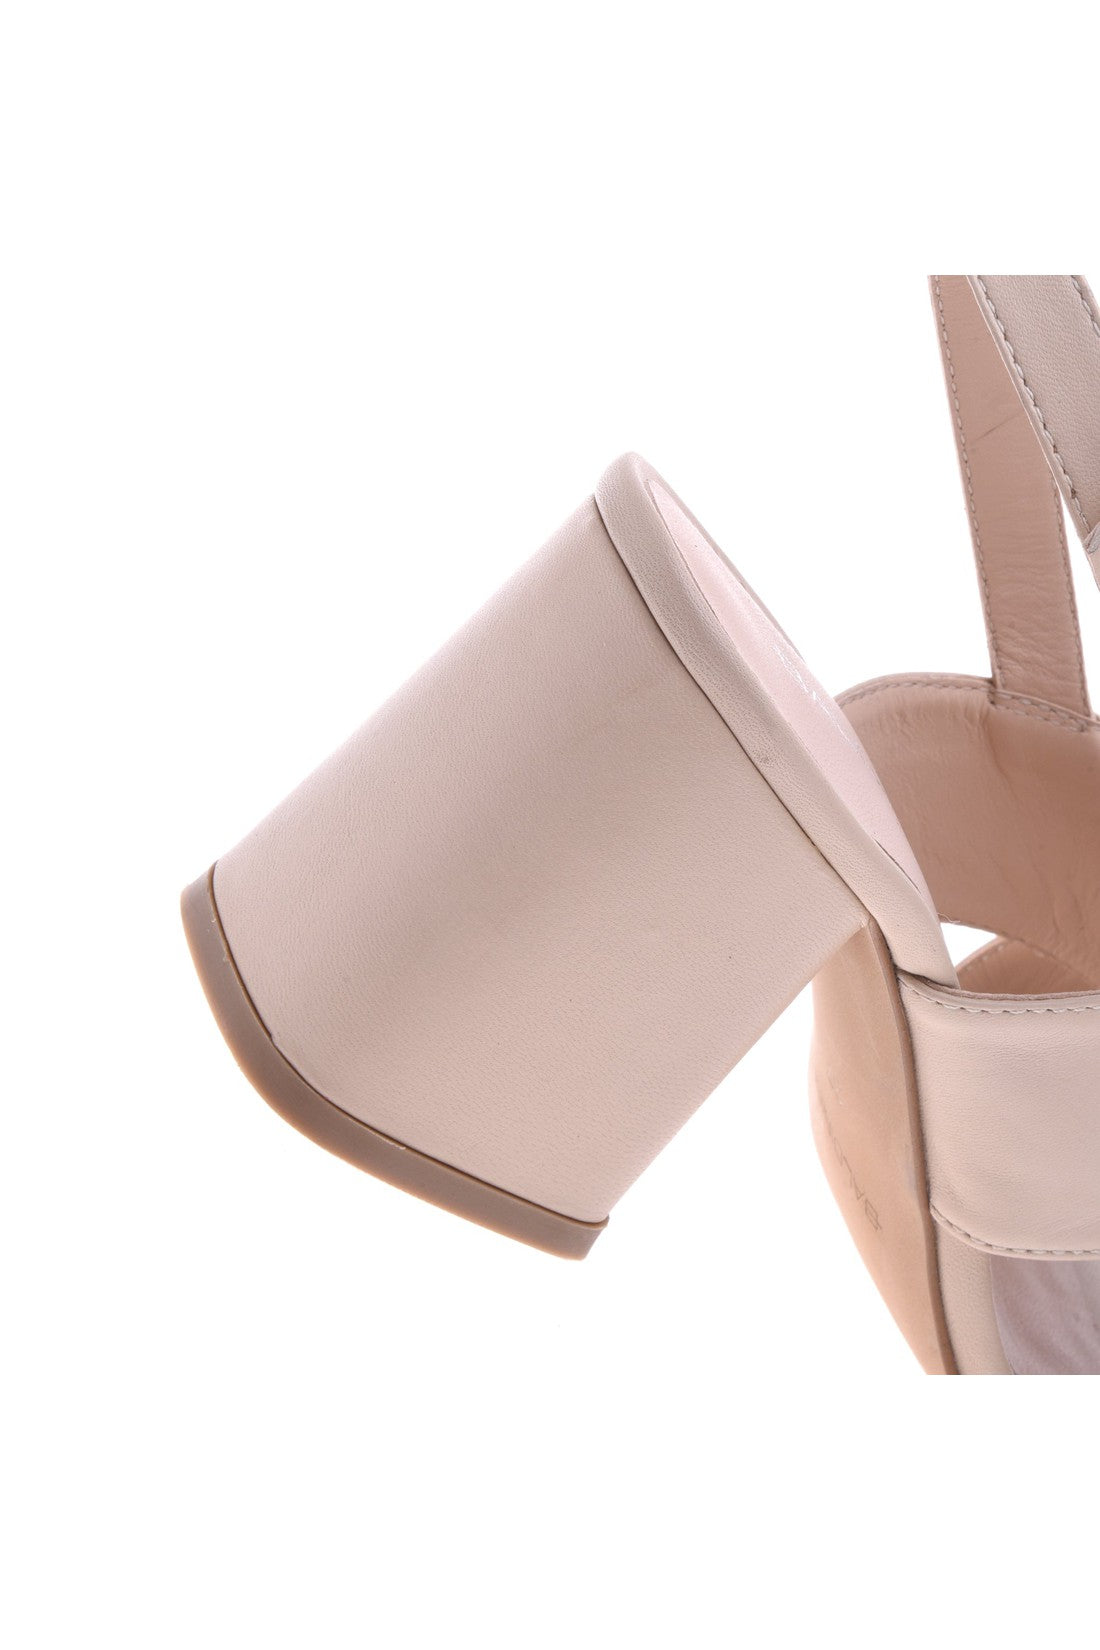 BALDININI-OUTLET-SALE-Sandal-in-beige-nappa-leather-Sandalen-ARCHIVE-COLLECTION-4.jpg